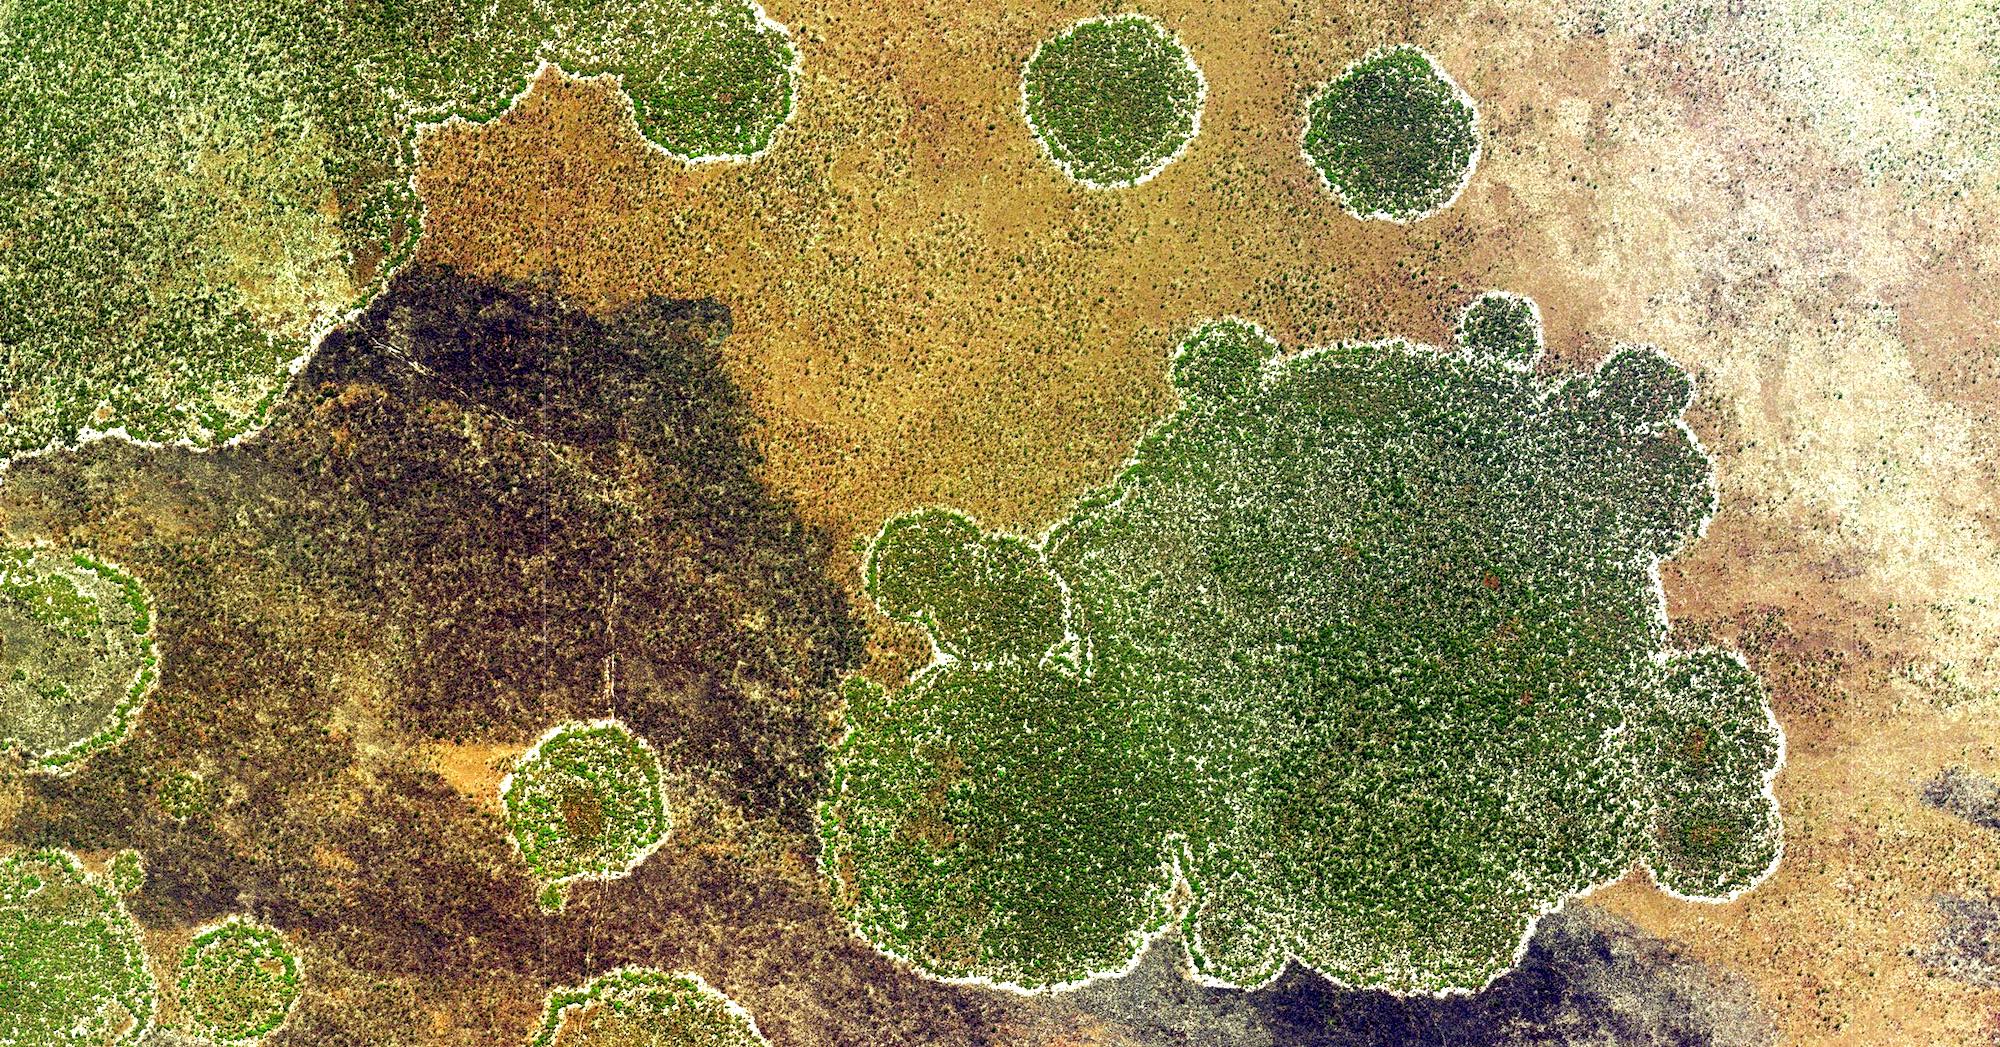 An aerial view showing distinctive green vegetation circles against a brownish background.